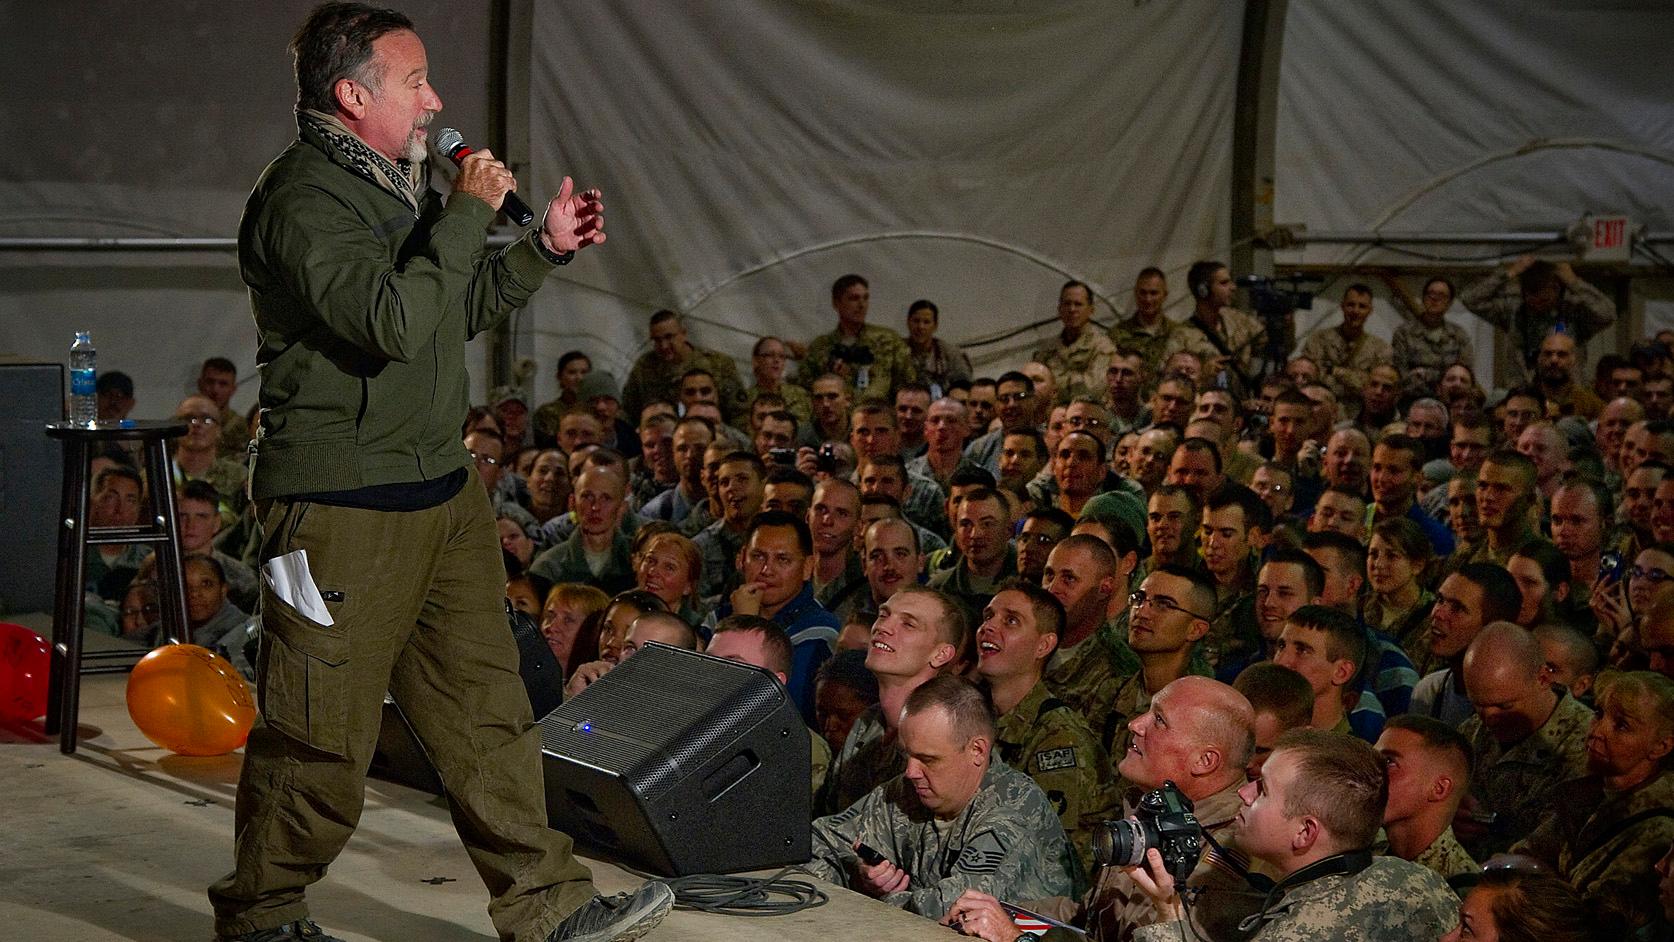 Robin Williams entertains troops during a USO performance.